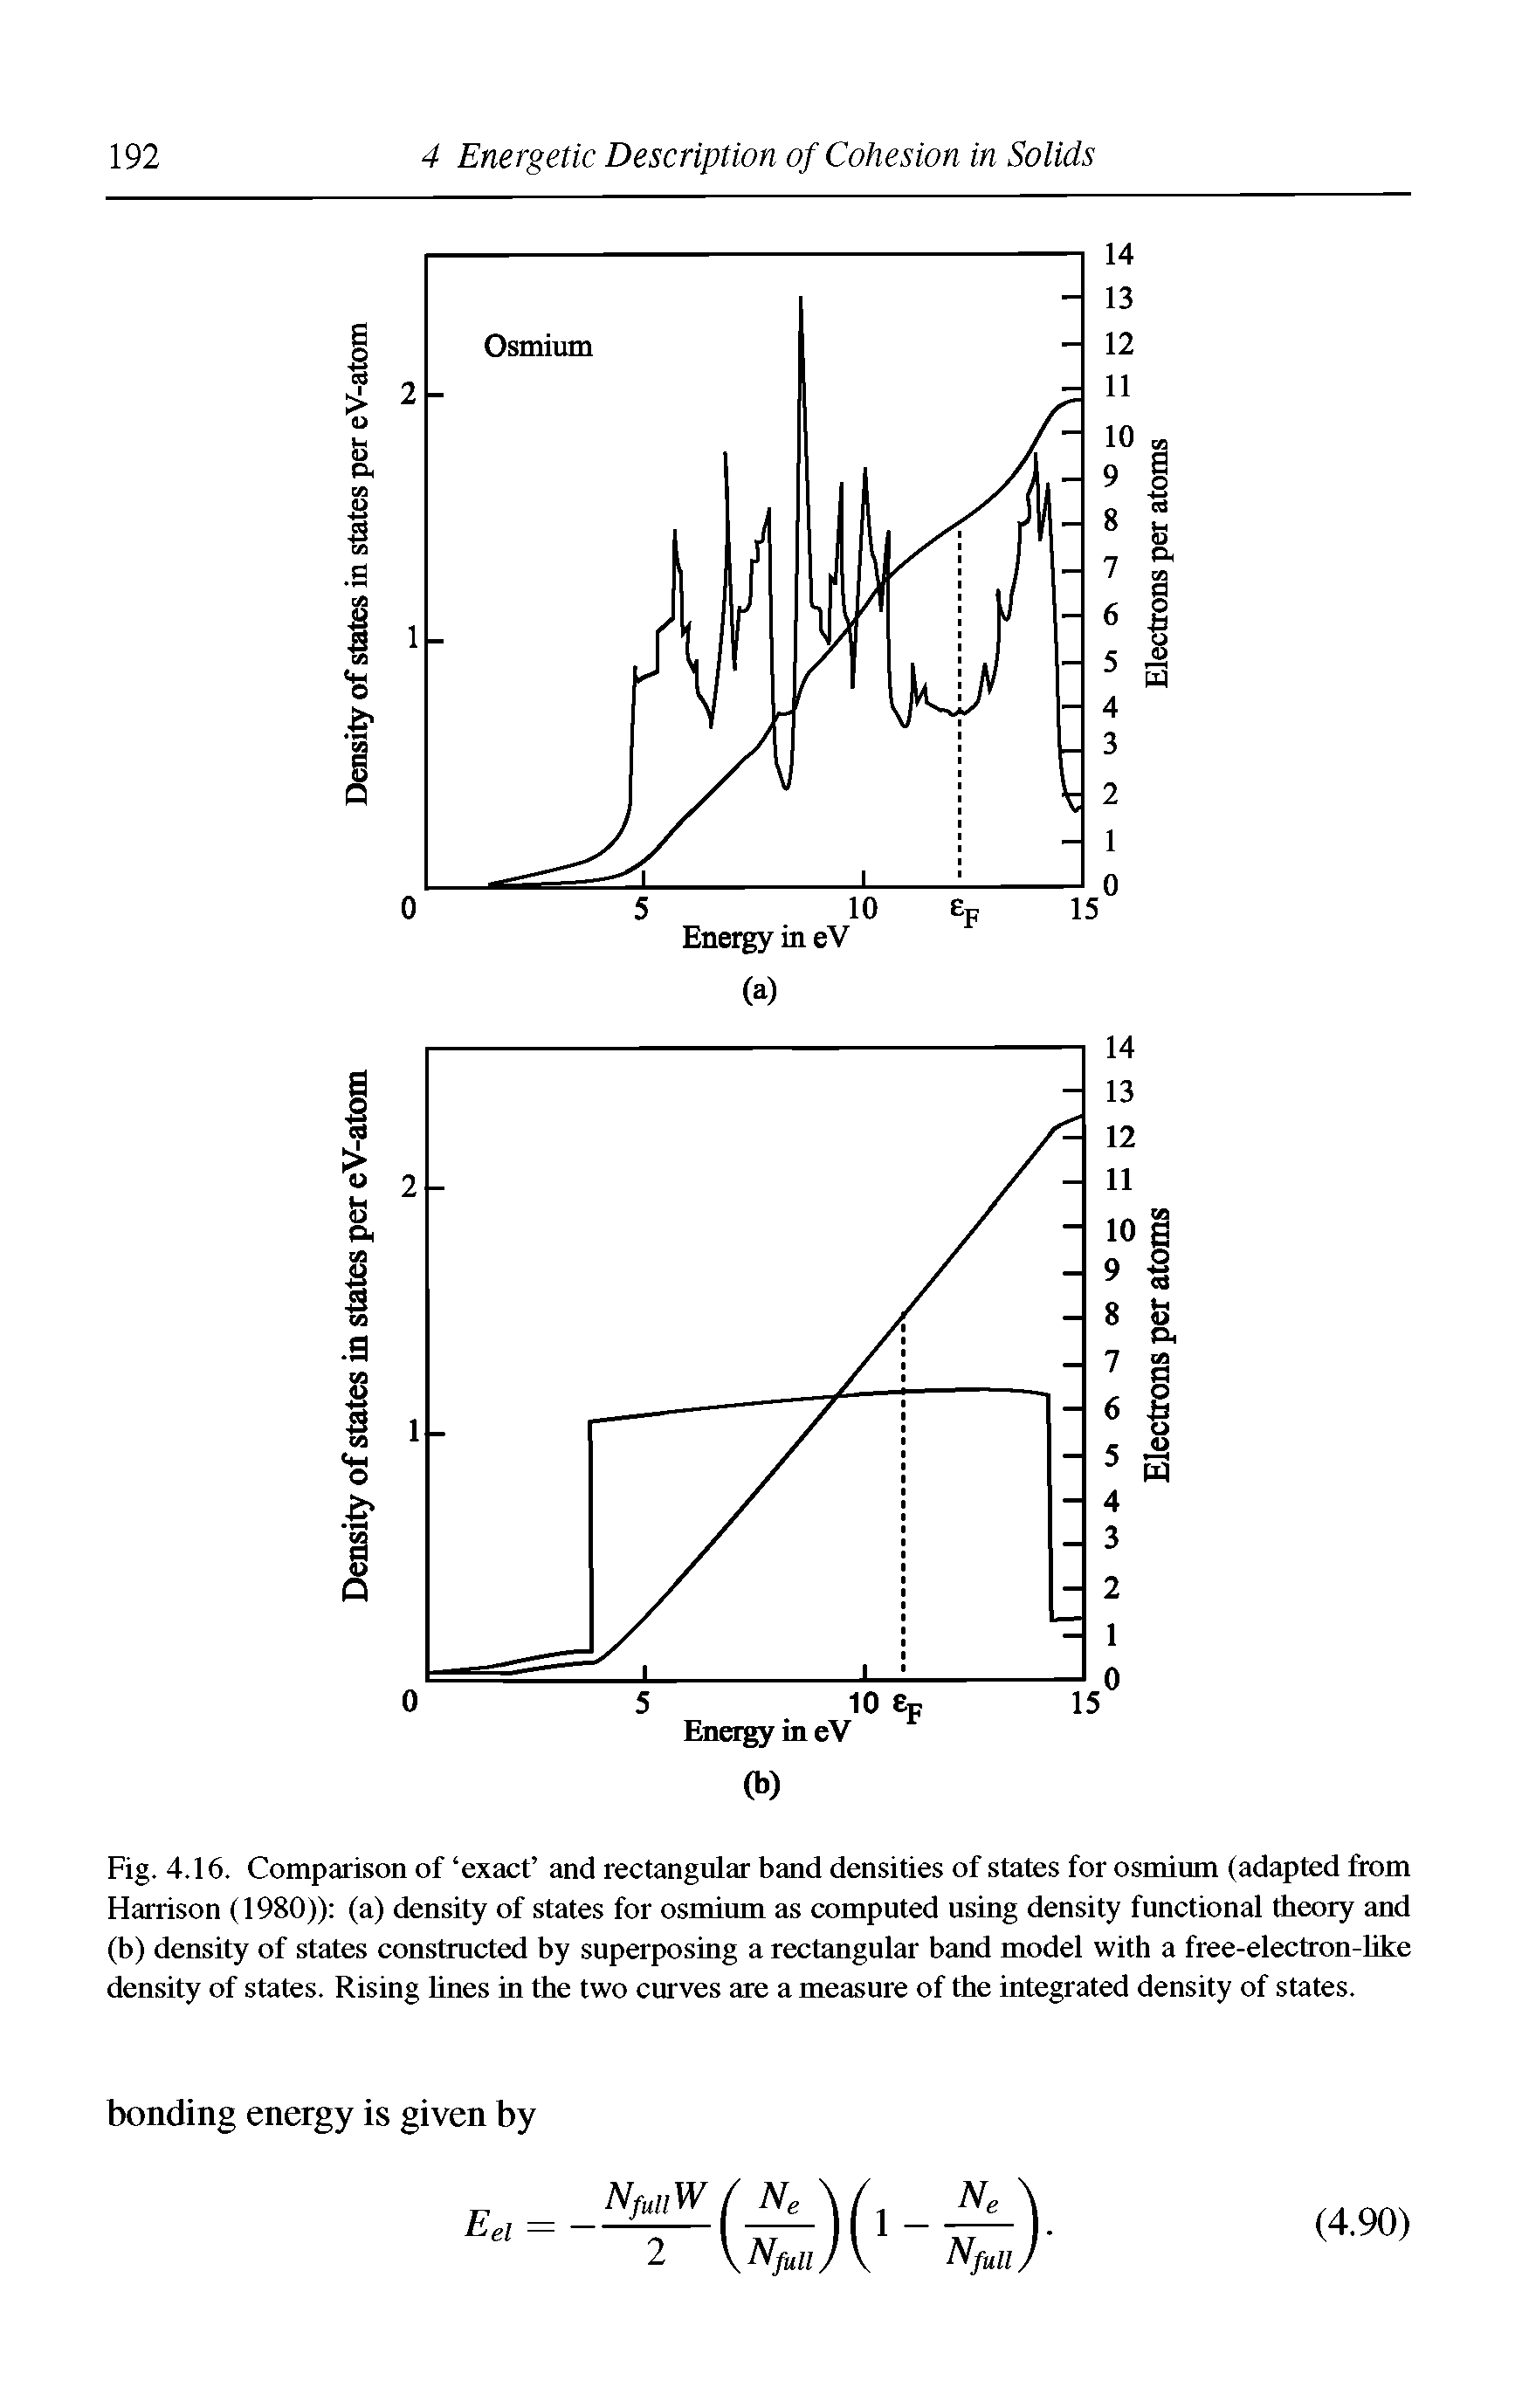 Fig. 4.16. Comparison of exact and rectangular band densities of states for osmium (adapted from Harrison (1980)) (a) density of states for osmium as computed using density functional theory and (b) density of states constructed by superposiug a rectaugular baud model with a free-electrou-bke deusity of states. Rising Unes in the two curves are a measure of the integrated density of states.